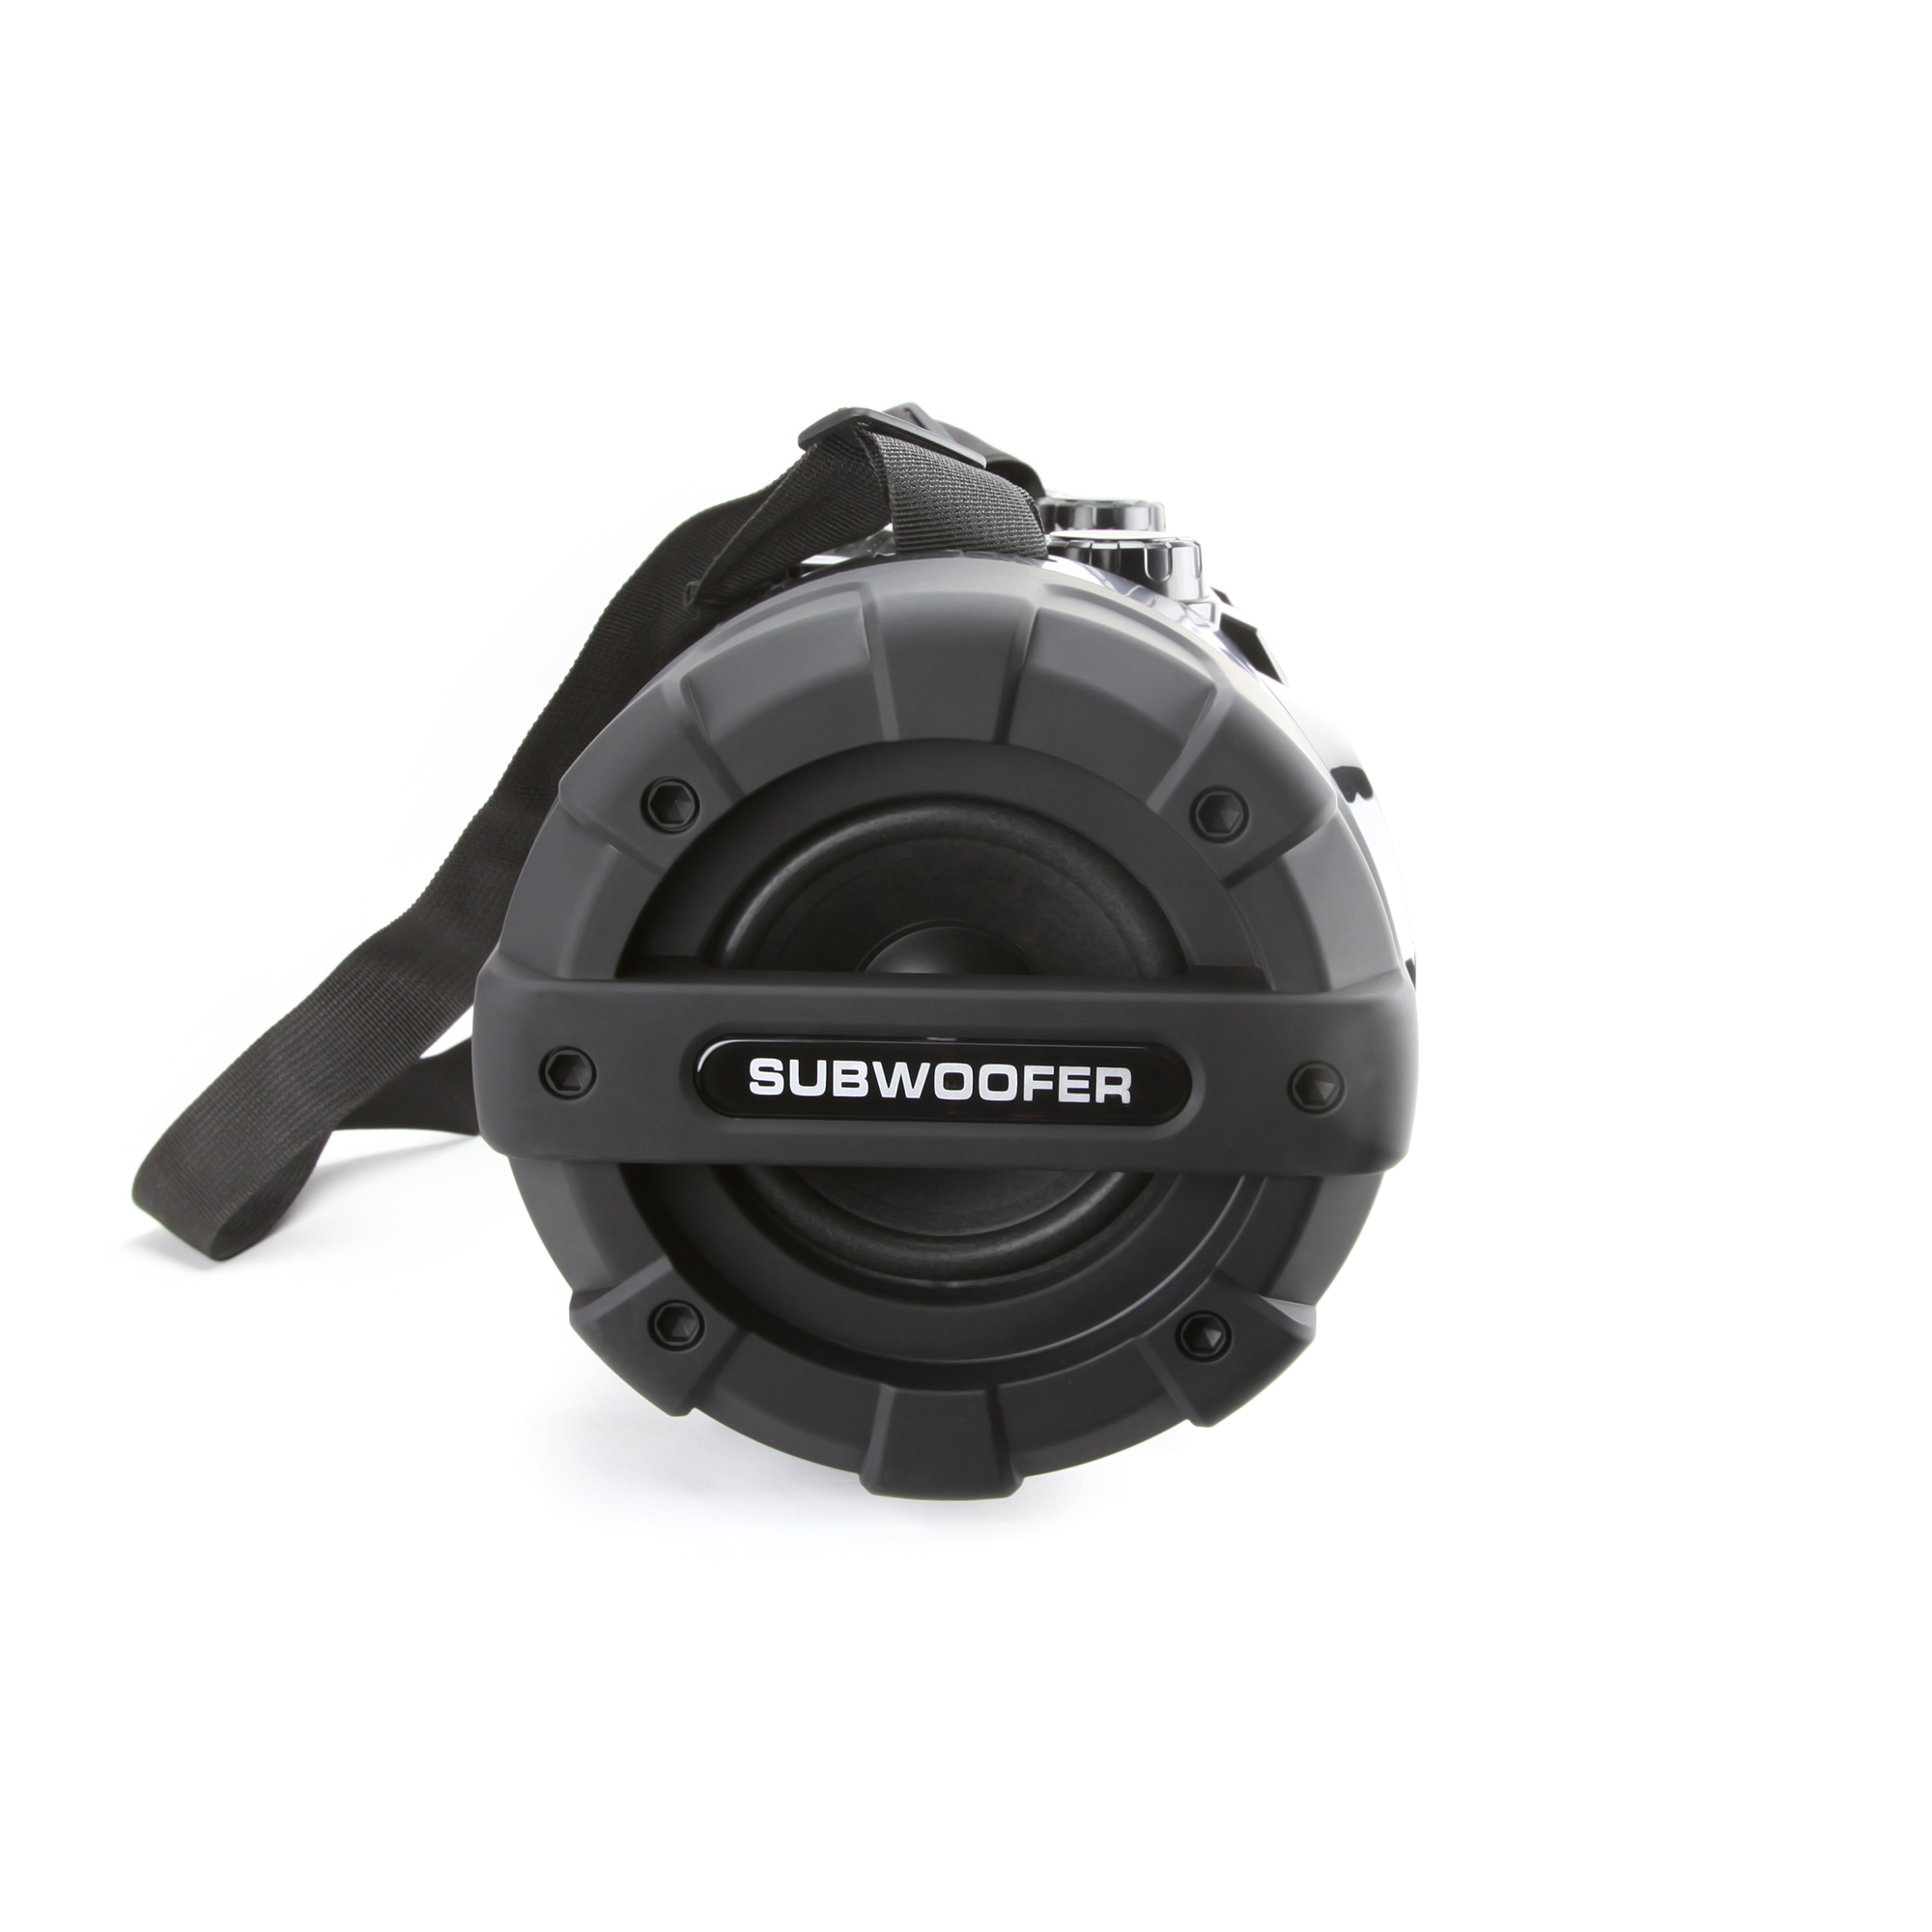 Dual Subwoofer Bluetooth® Boombox  with CD / MP3 Player